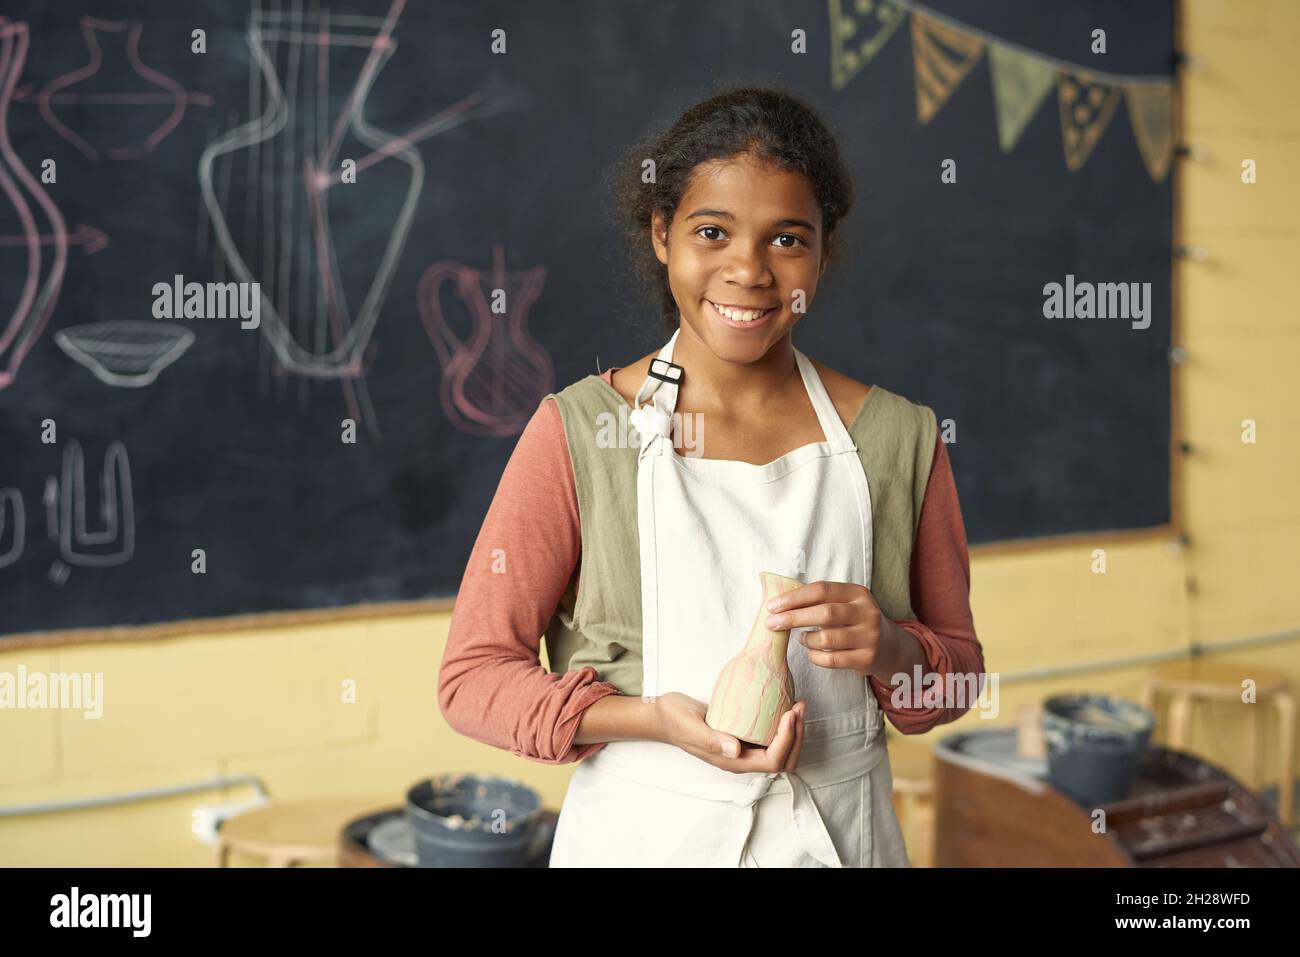 Portrait of smiling African American girl in white apron standing with handmade vase against blackboard at pottery class Stock Photo